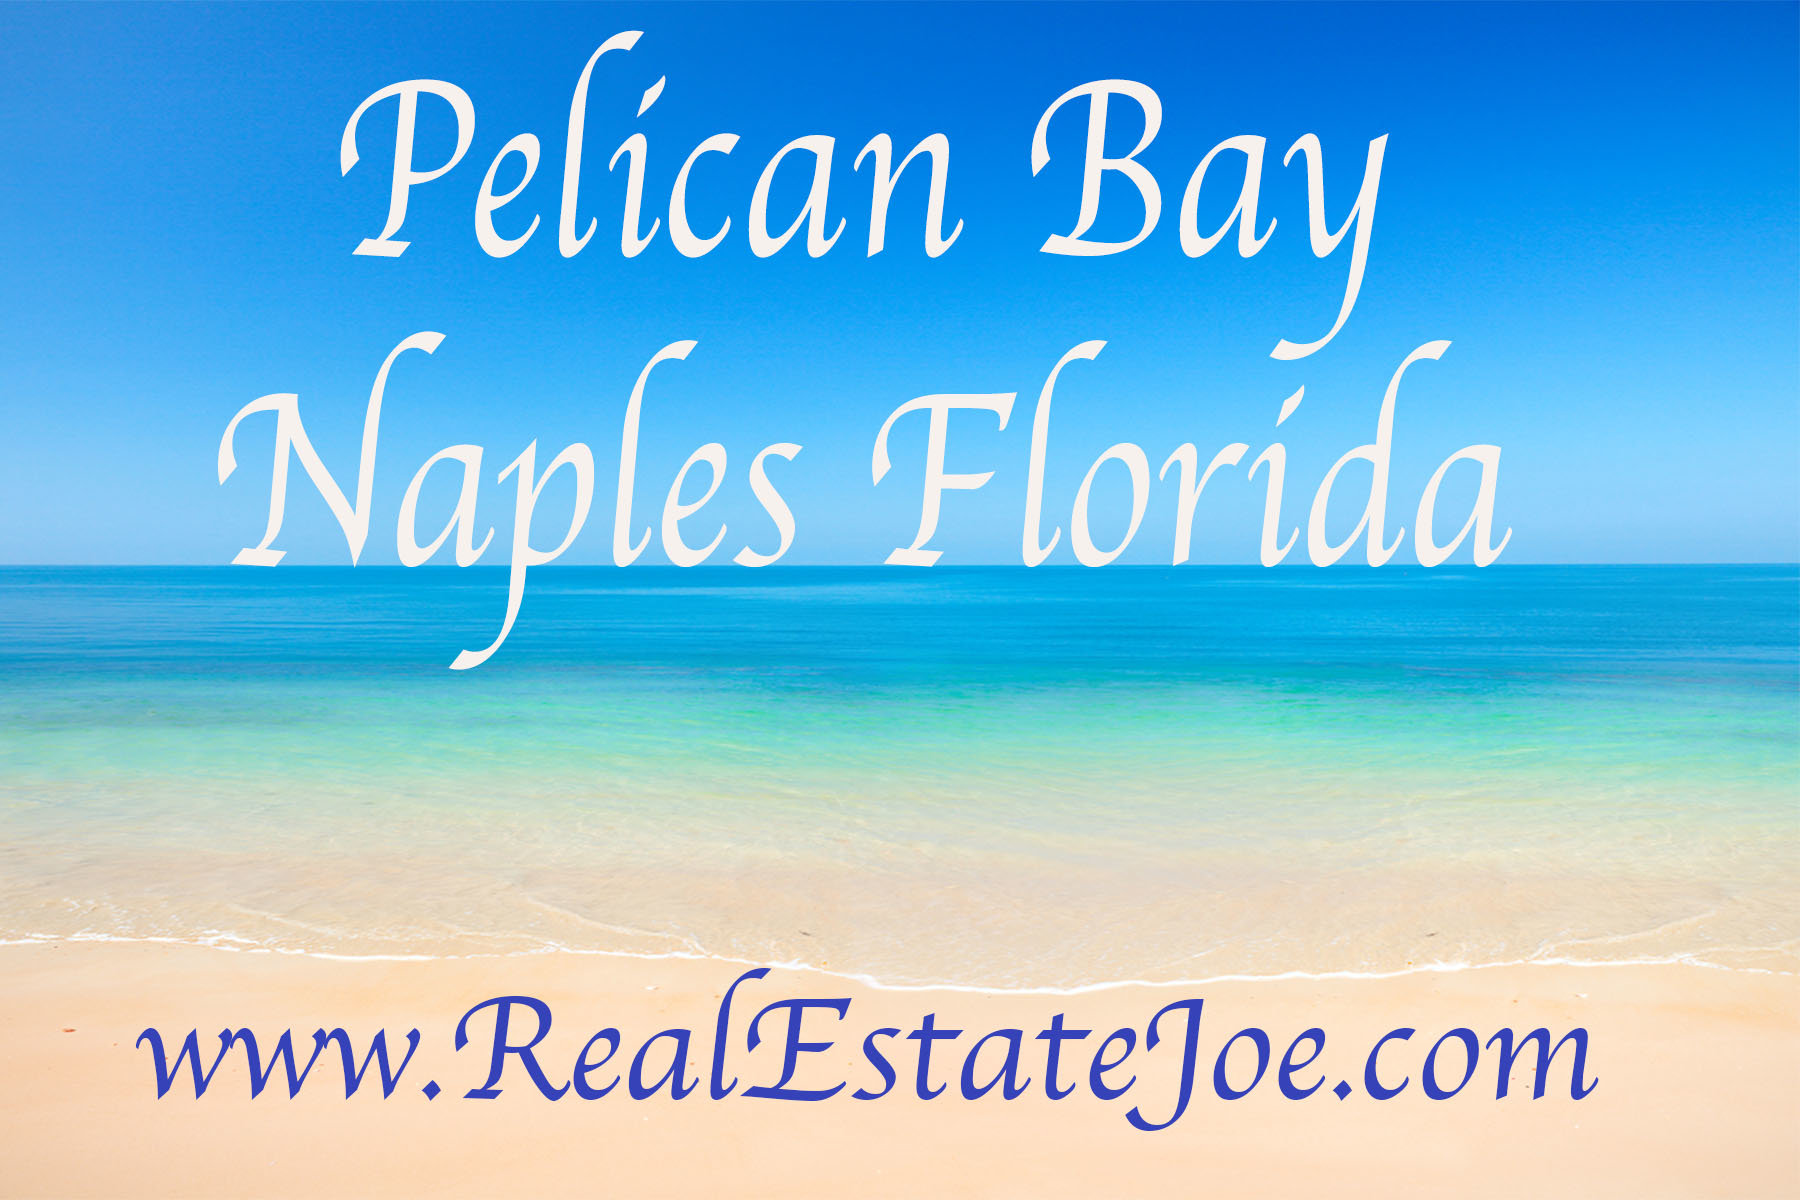 Pelican Bay Homes for sale in Naples Fl